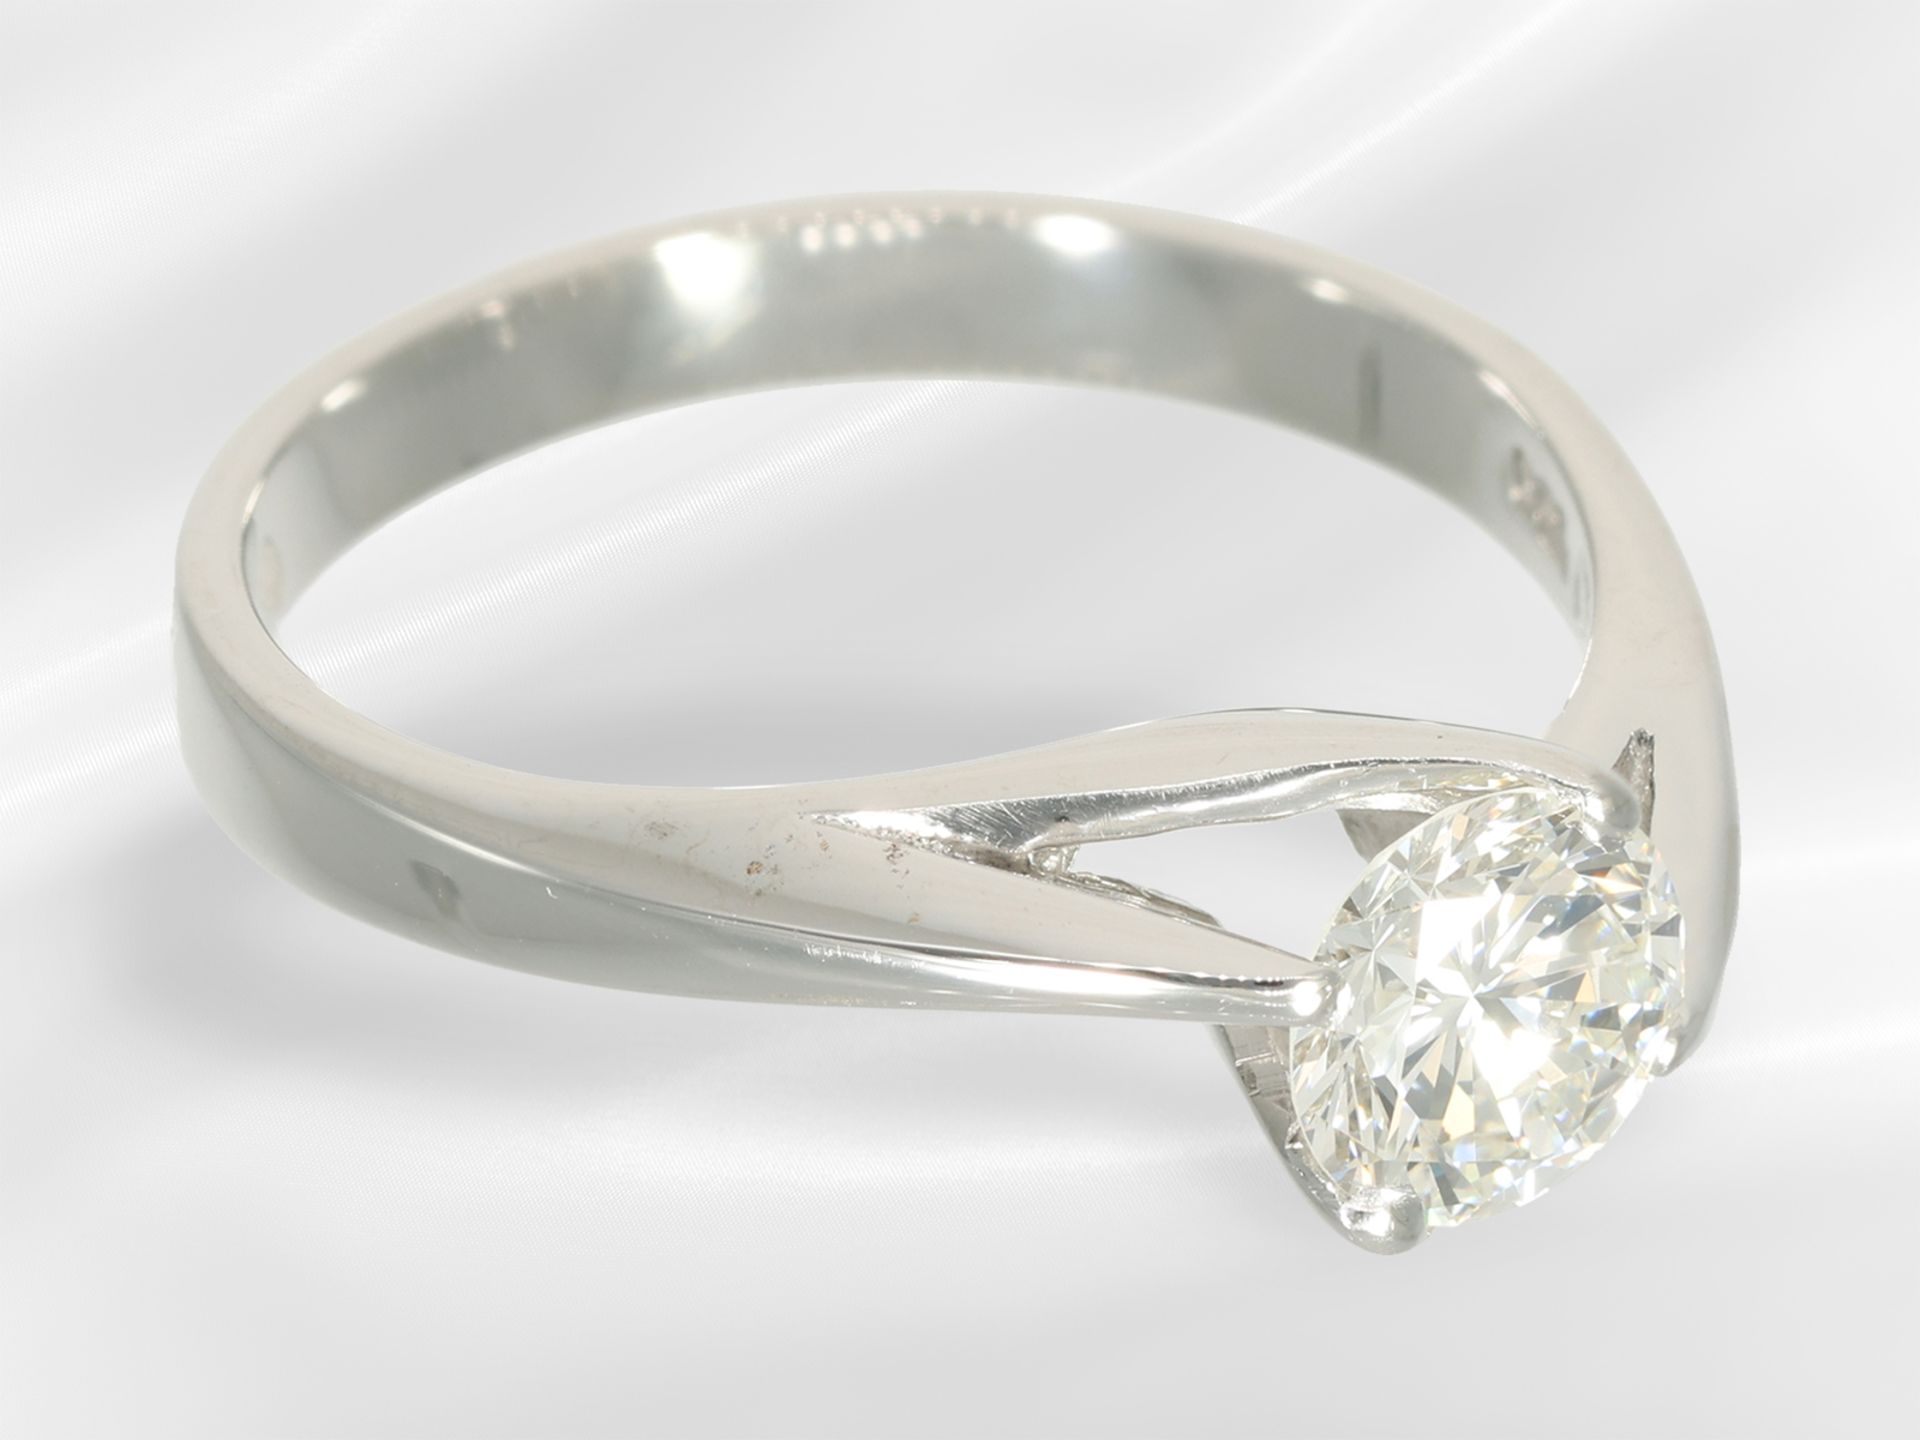 Ring: high-quality solitaire ring from Wempe, brilliant-cut diamond in top quality, flawless, 0.75ct - Image 4 of 4